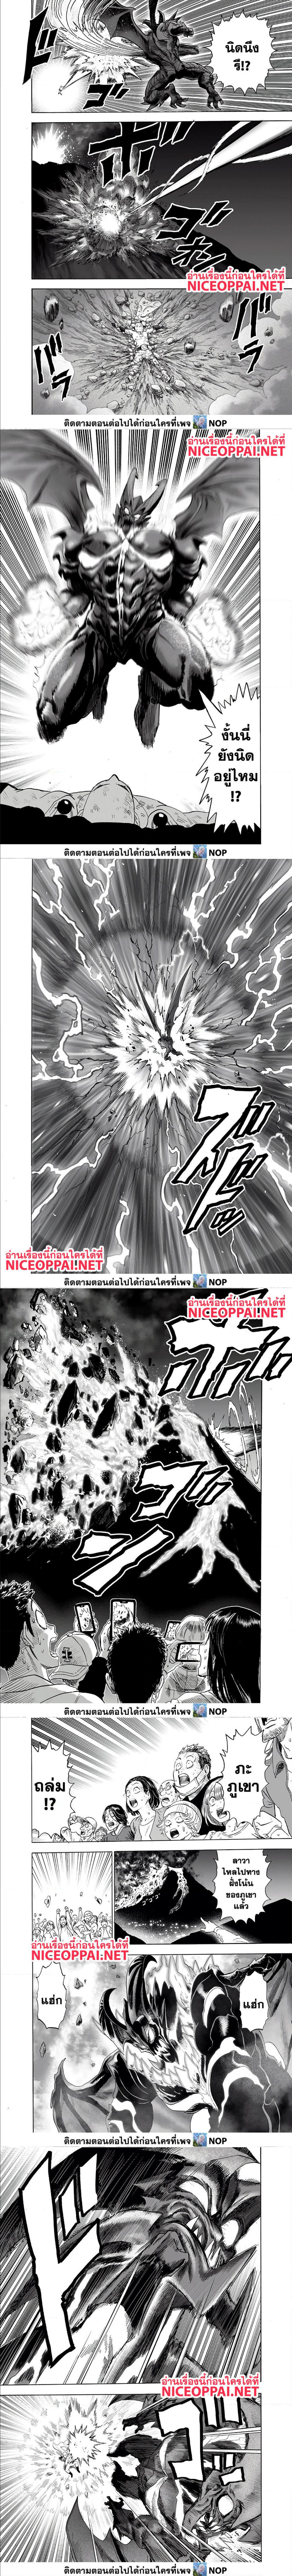 One Punch Man 163 (9)